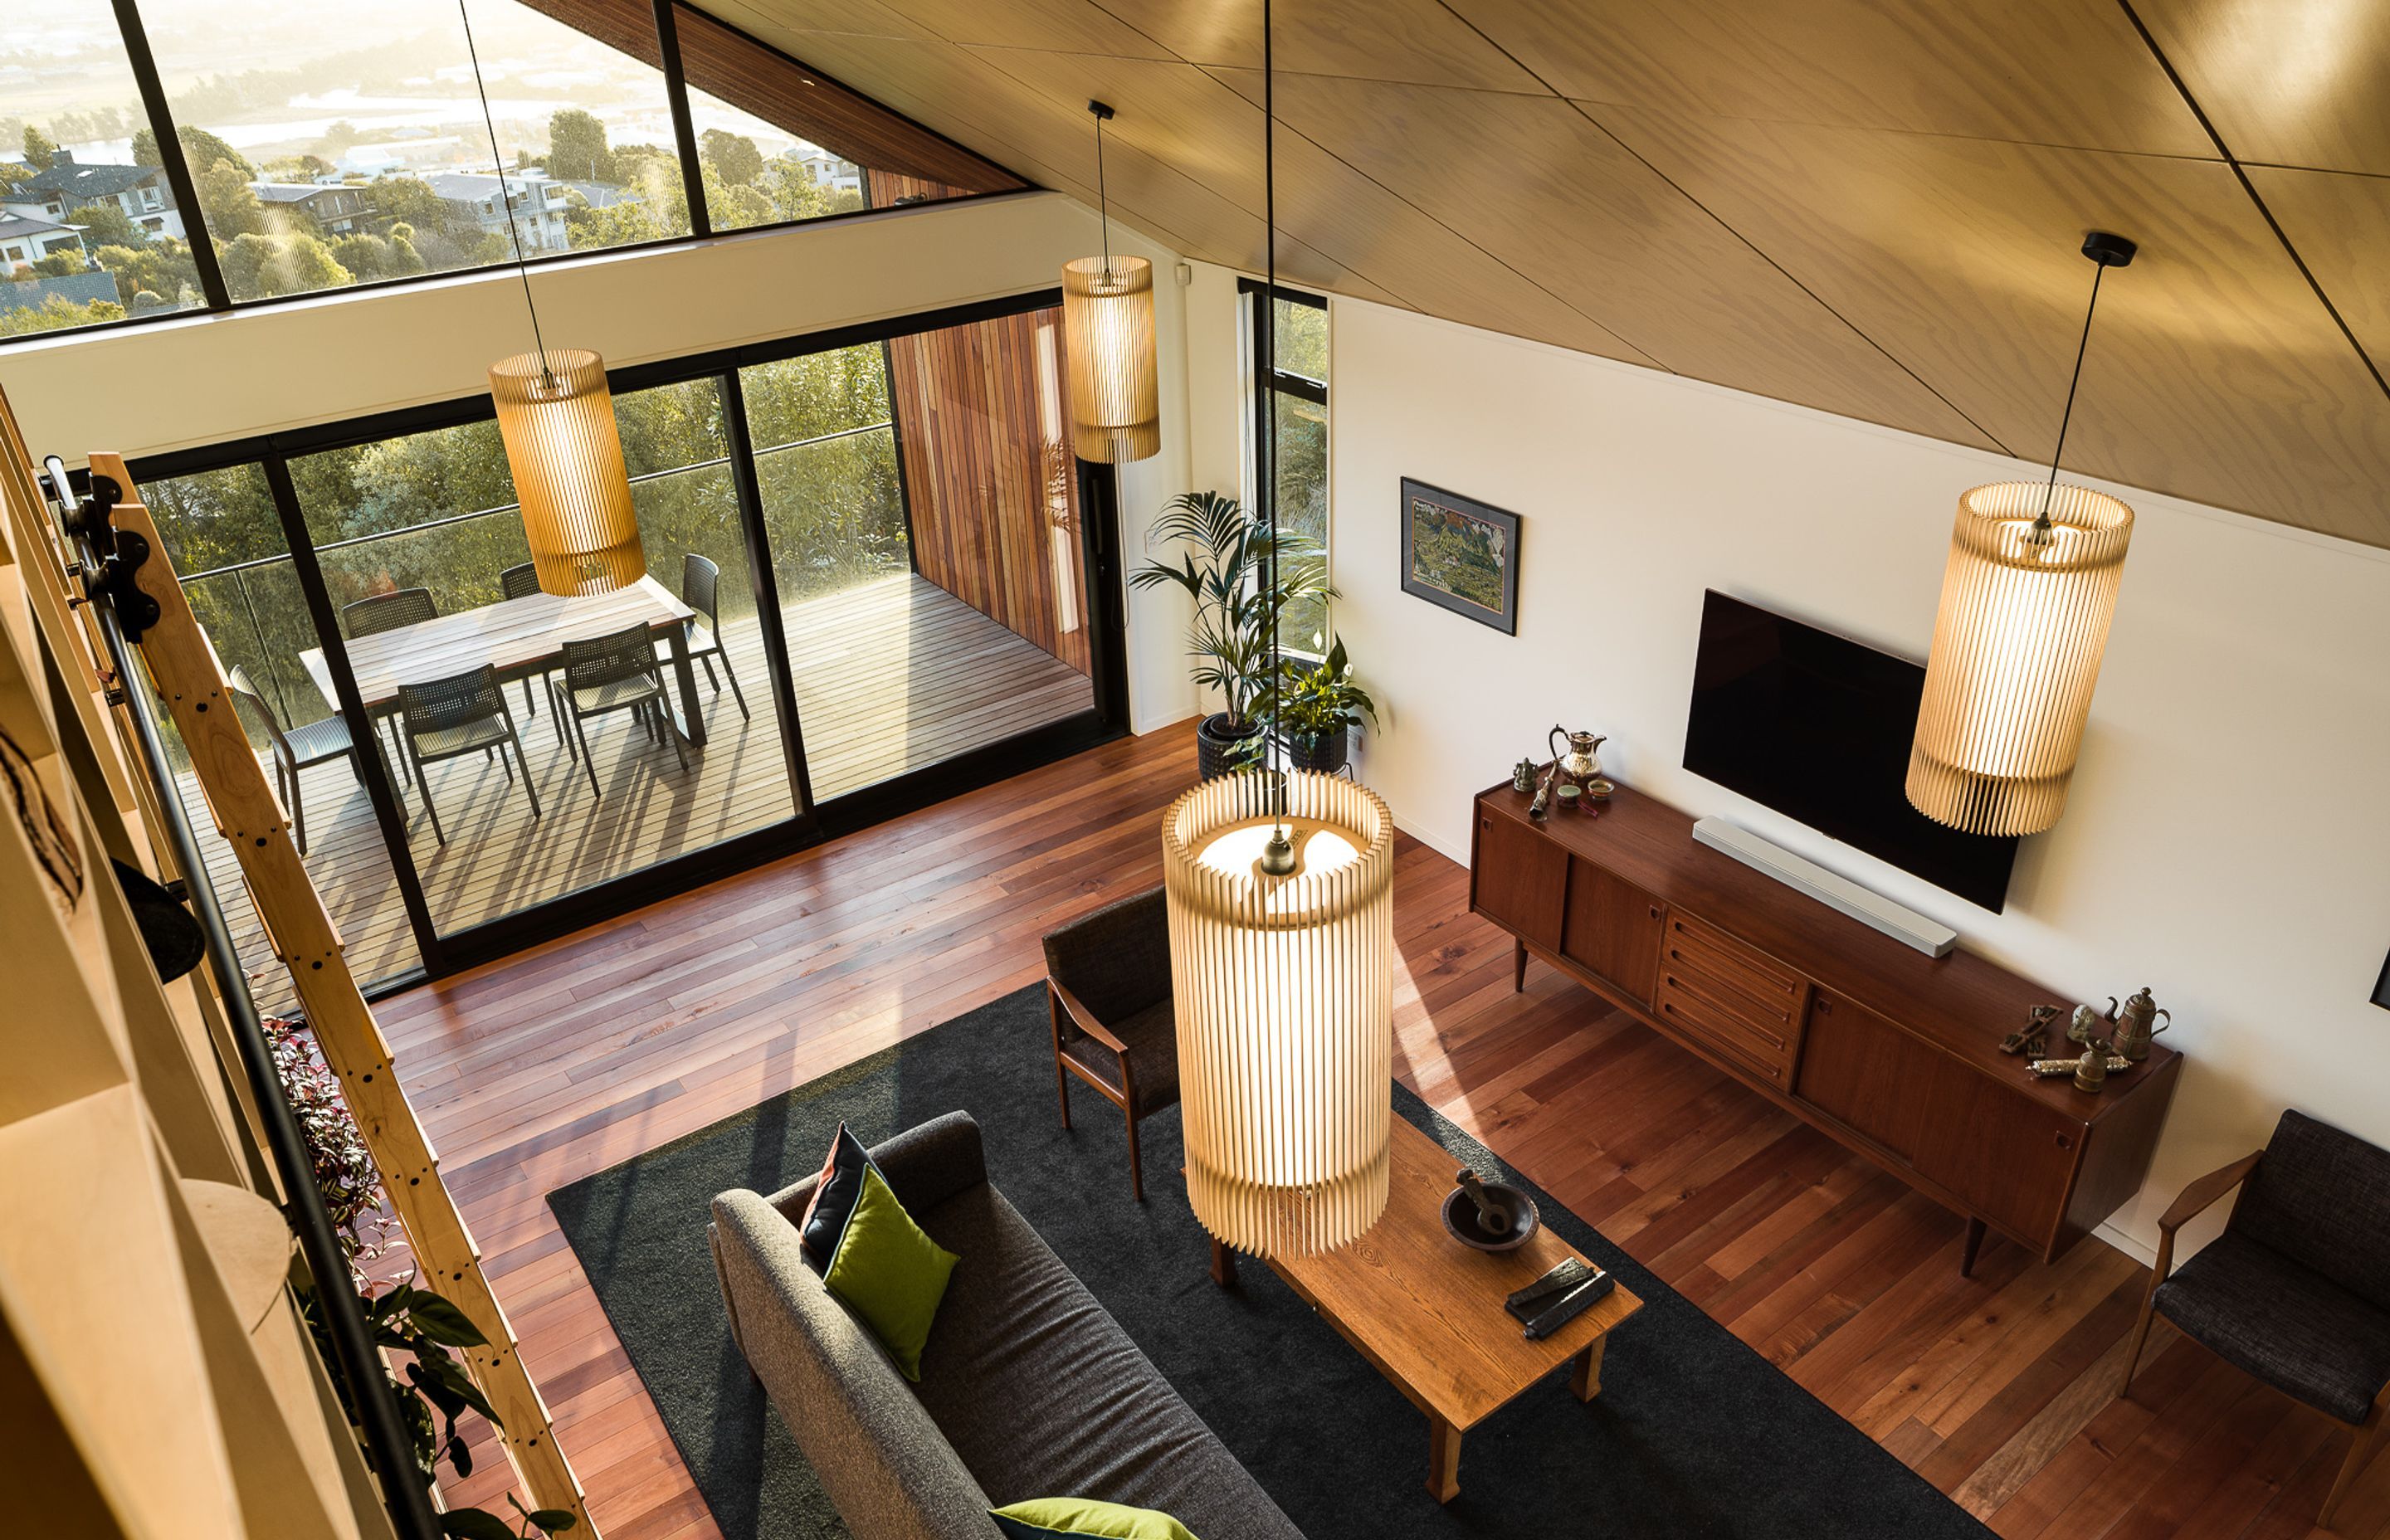 The double-height living area adds volumetric drama to the interior.